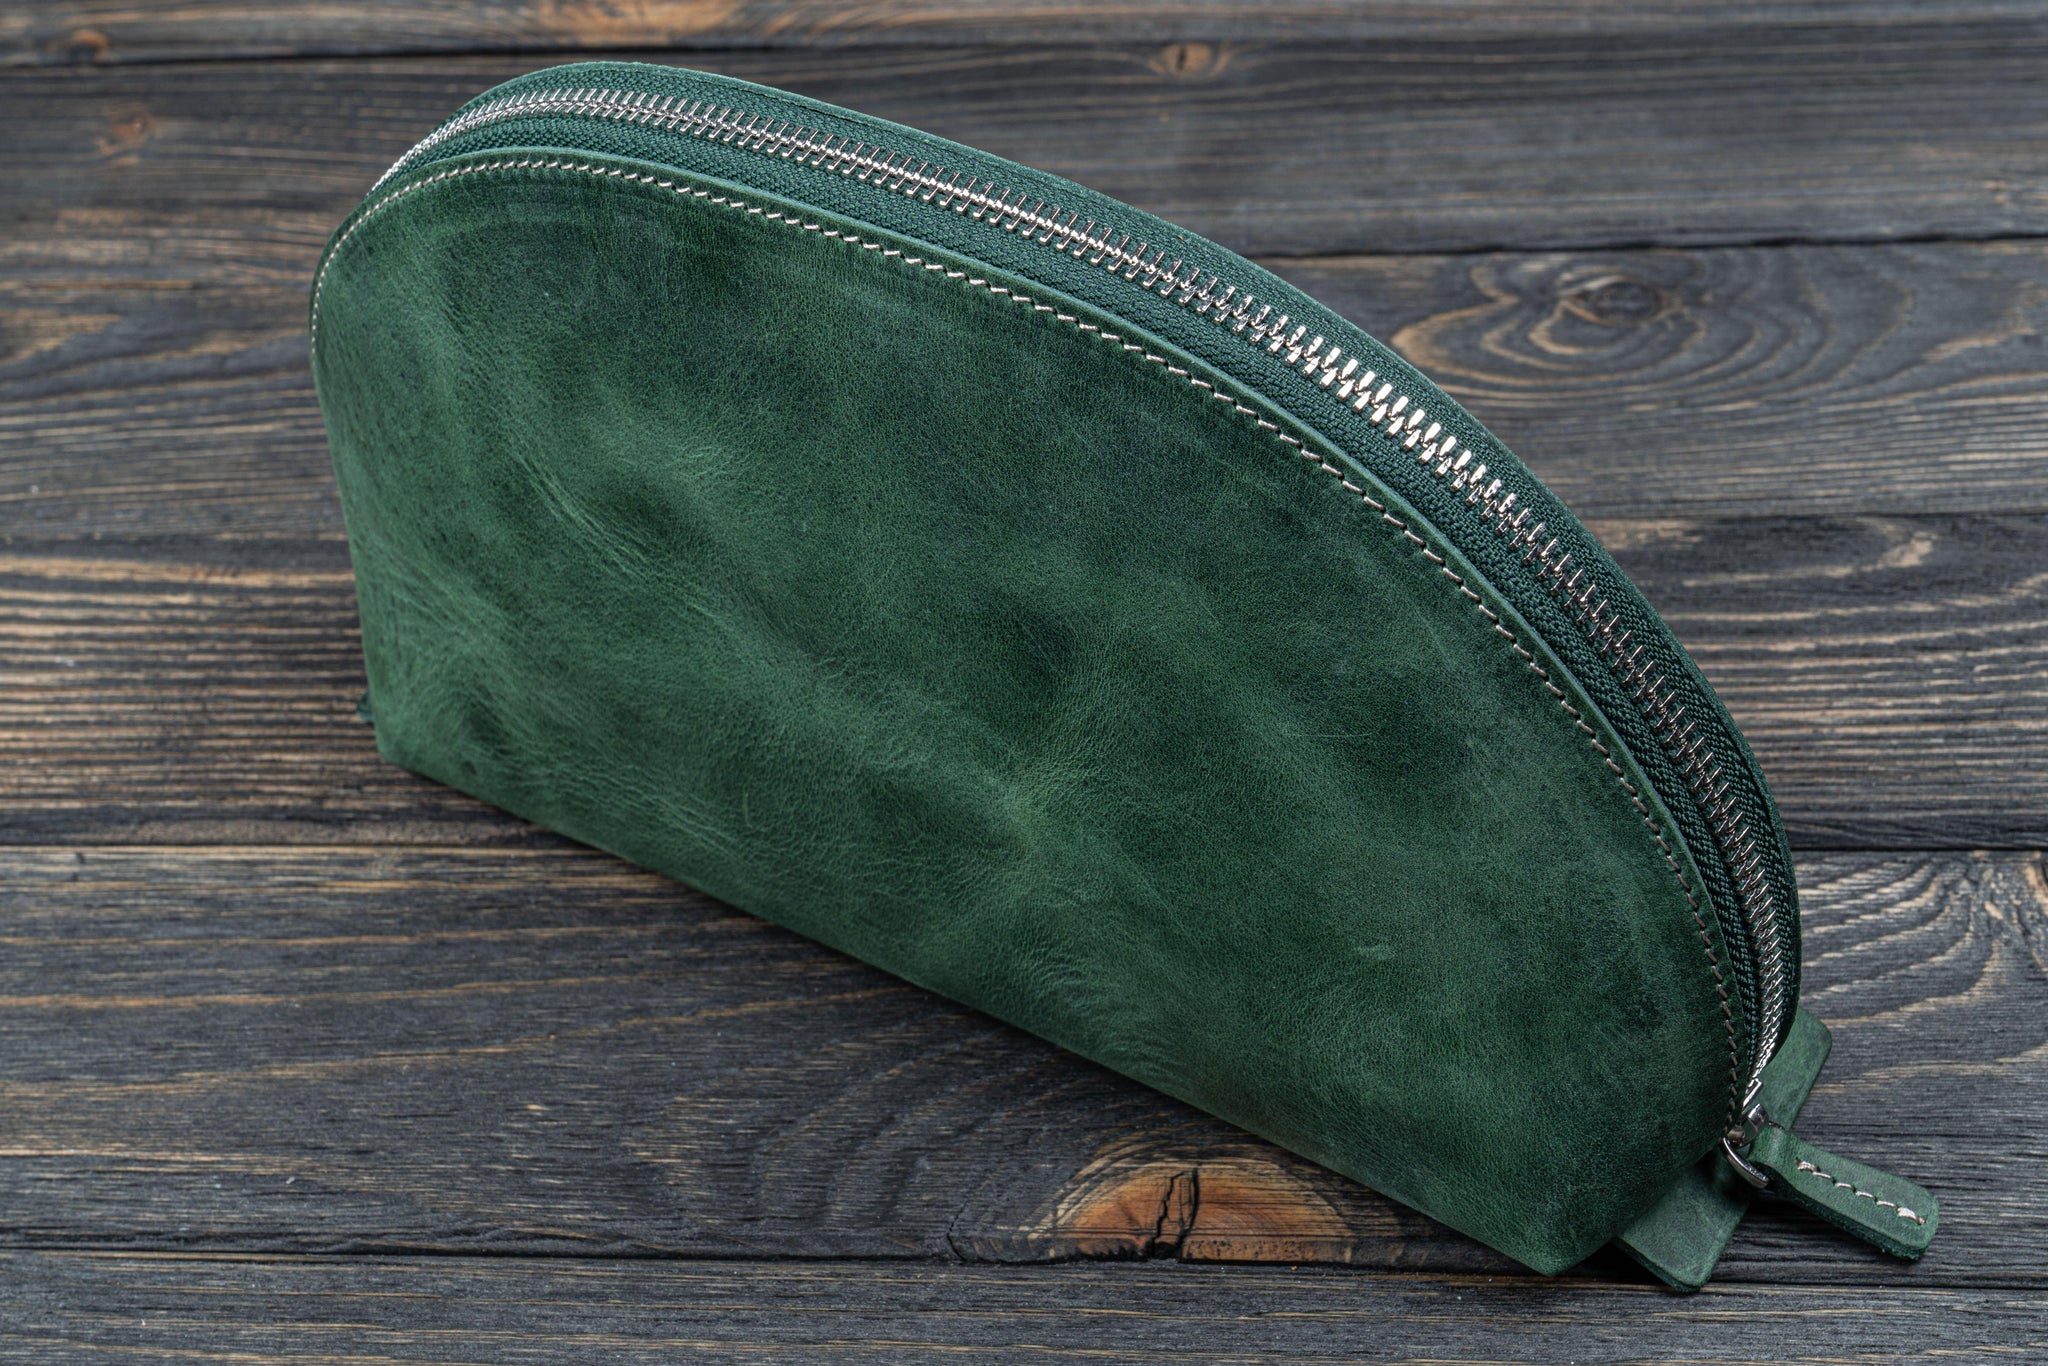 Pencil pouch Elizabeth Other Leathers - Personalisation